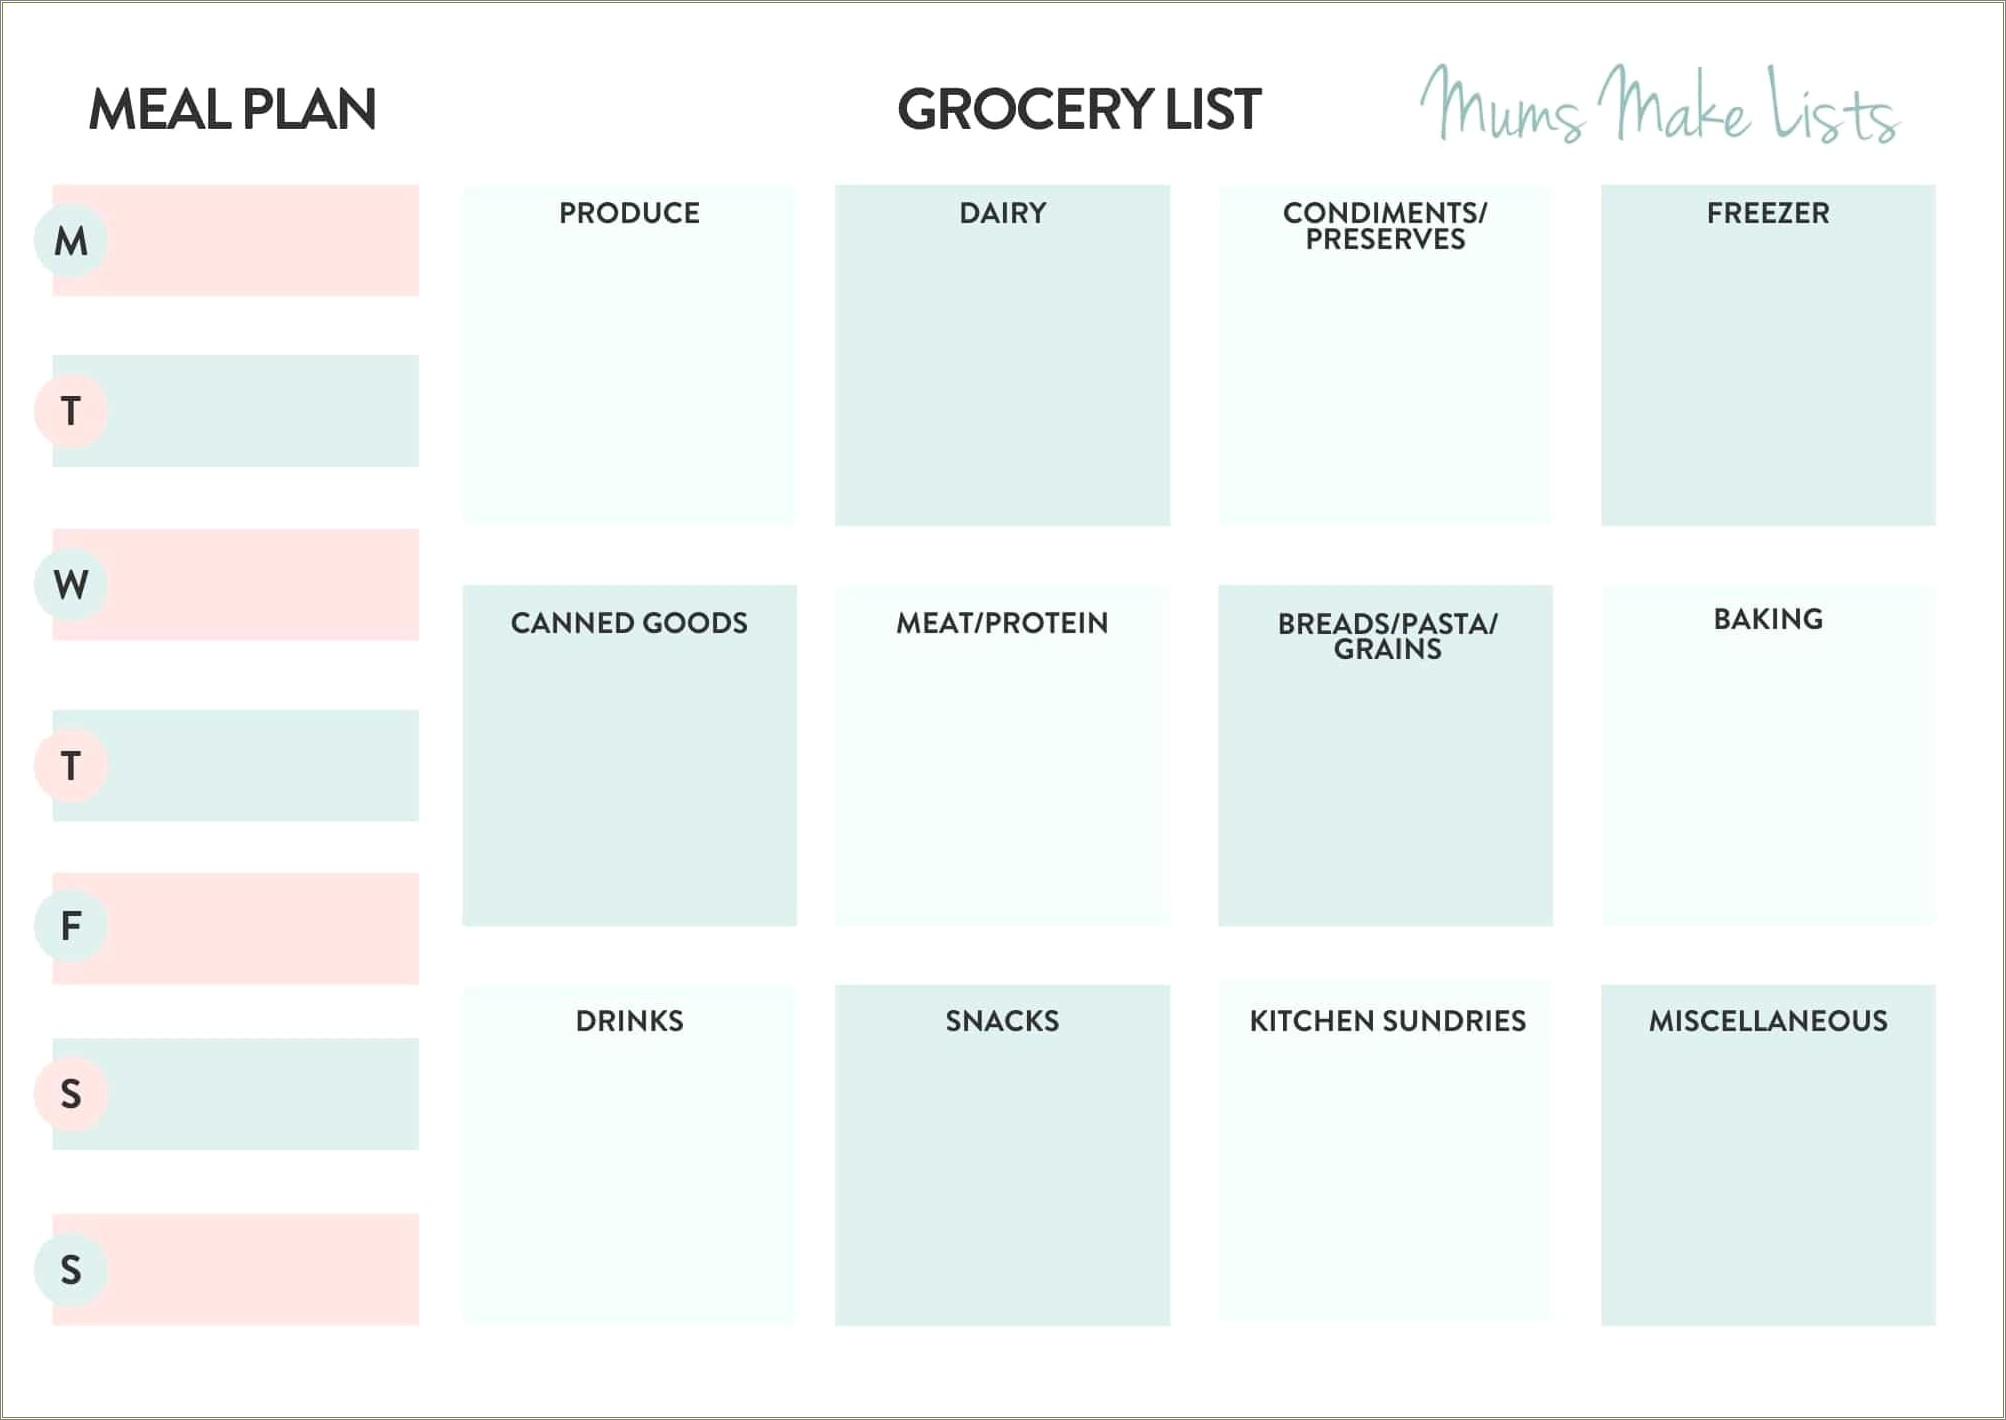 Free Printable Grocery Shopping List Categorized Template